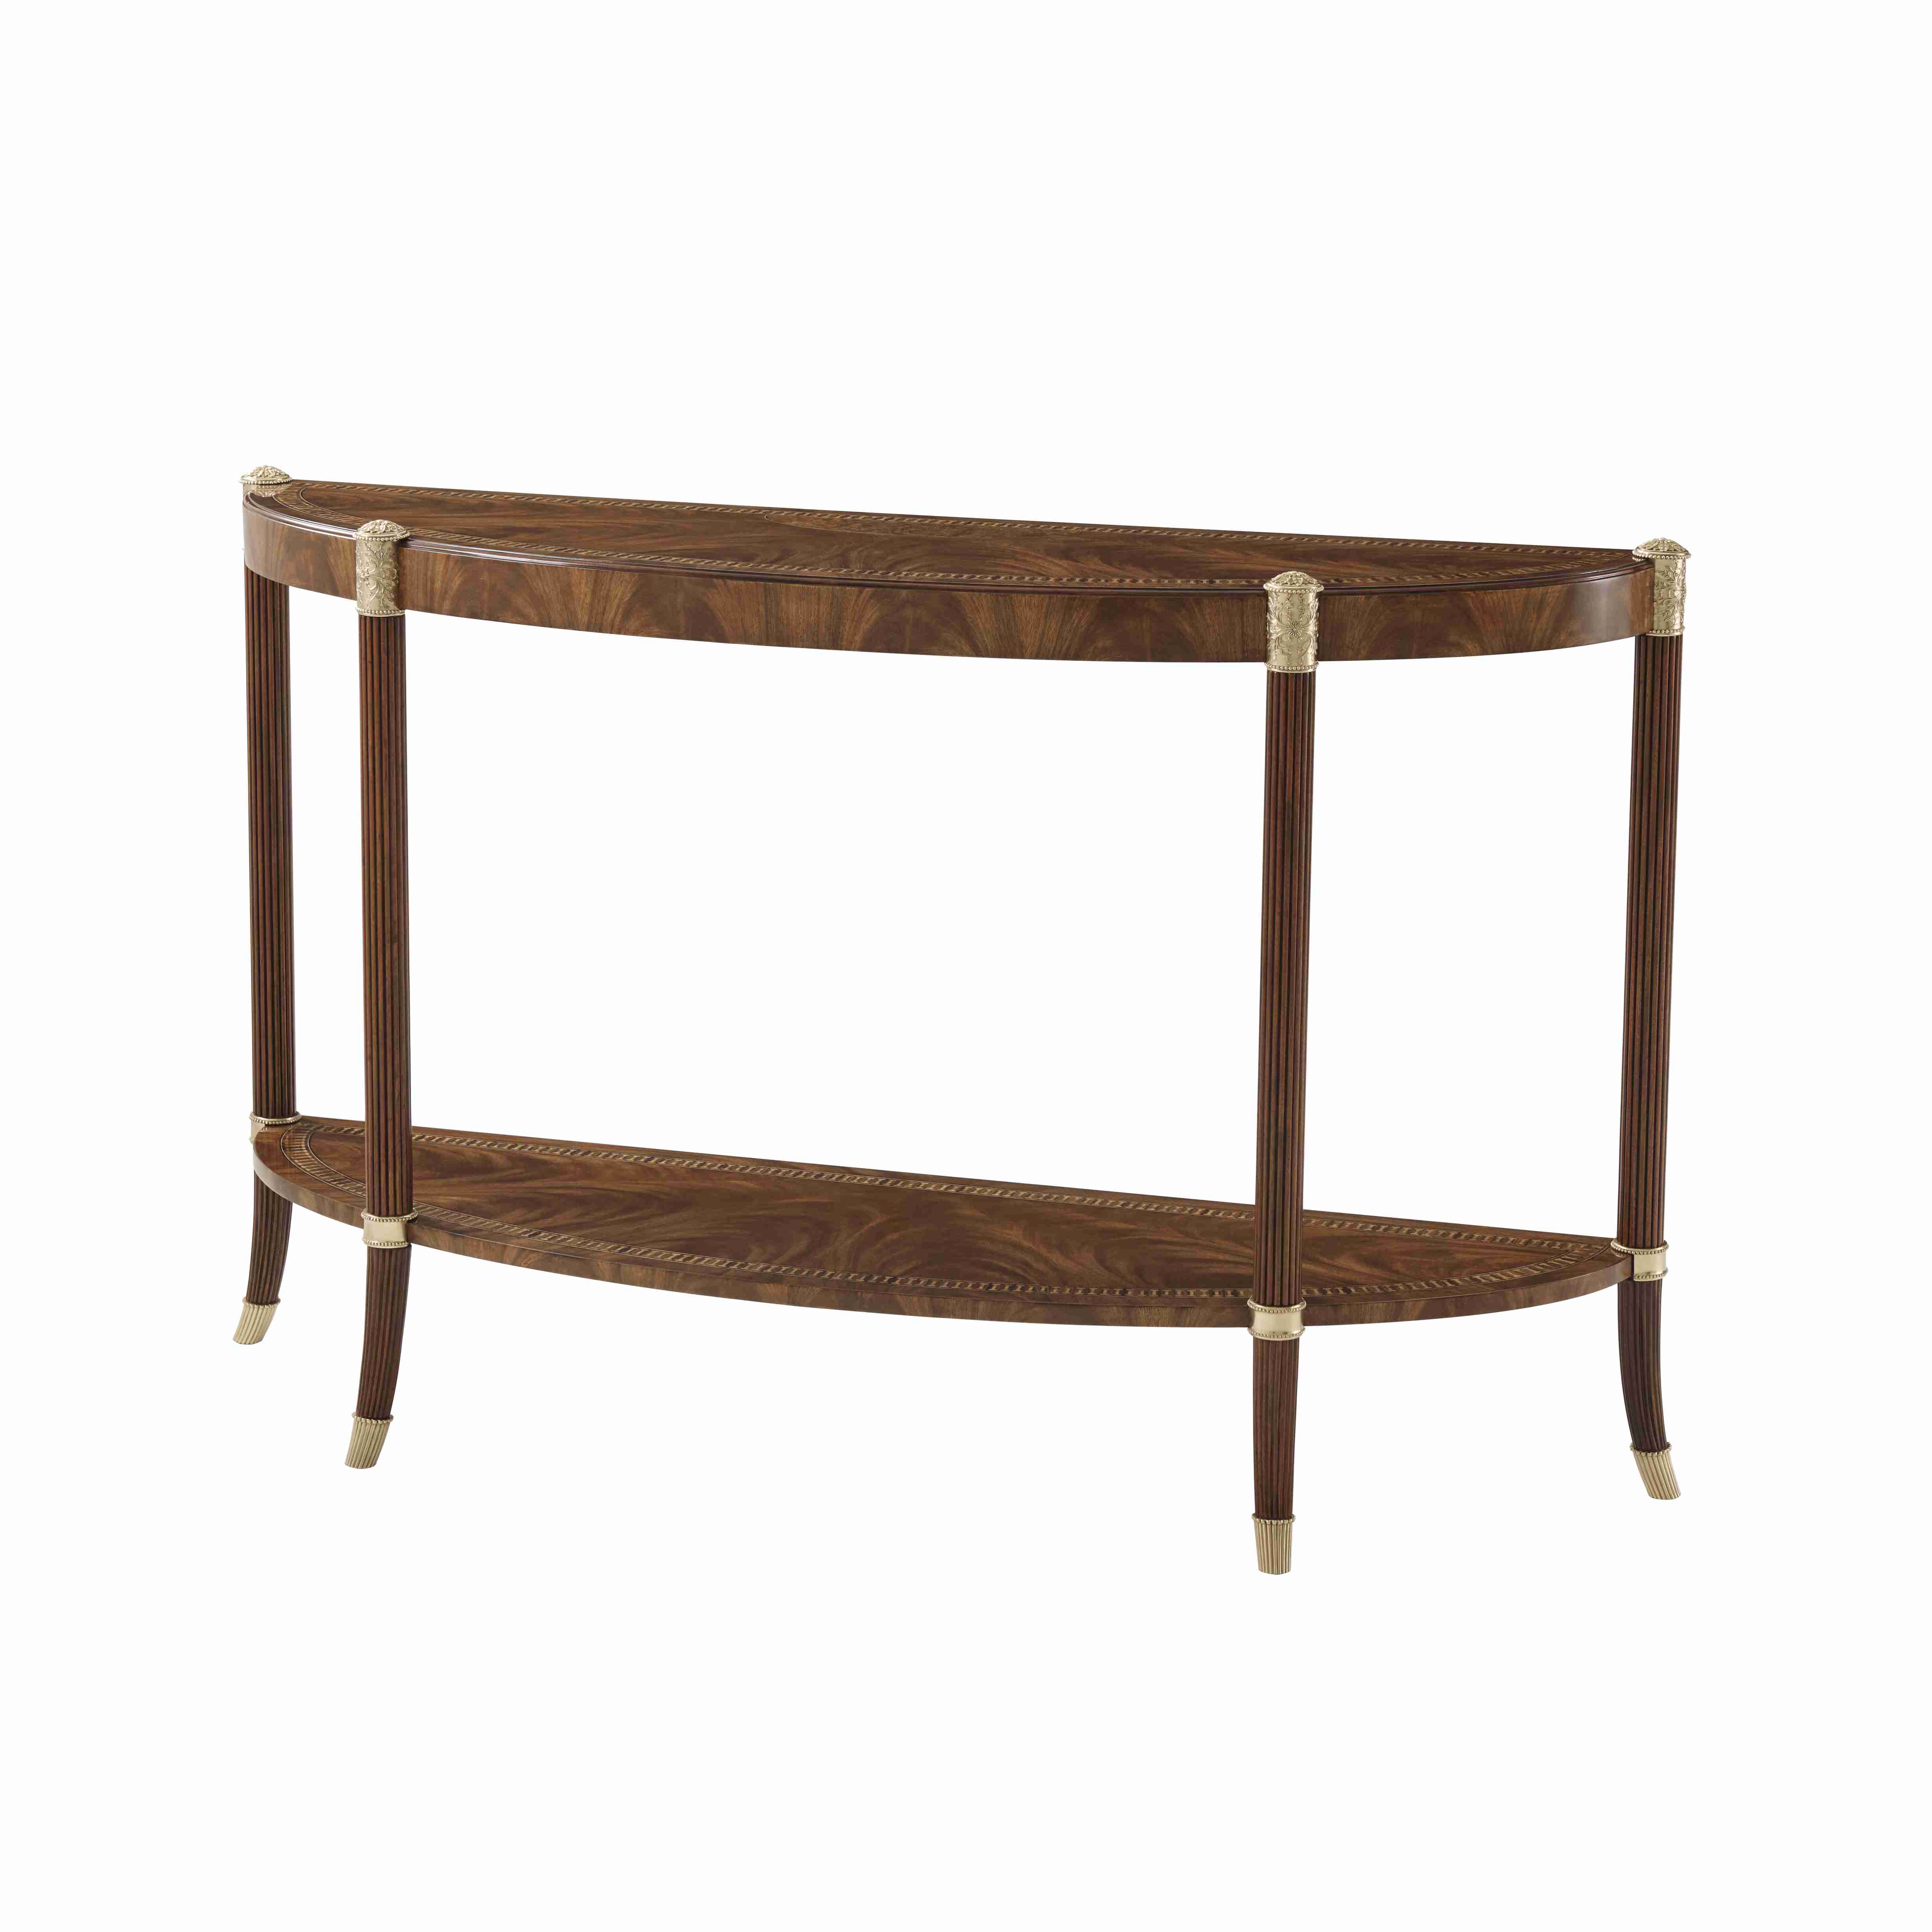 THE VERILY CONSOLE TABLE